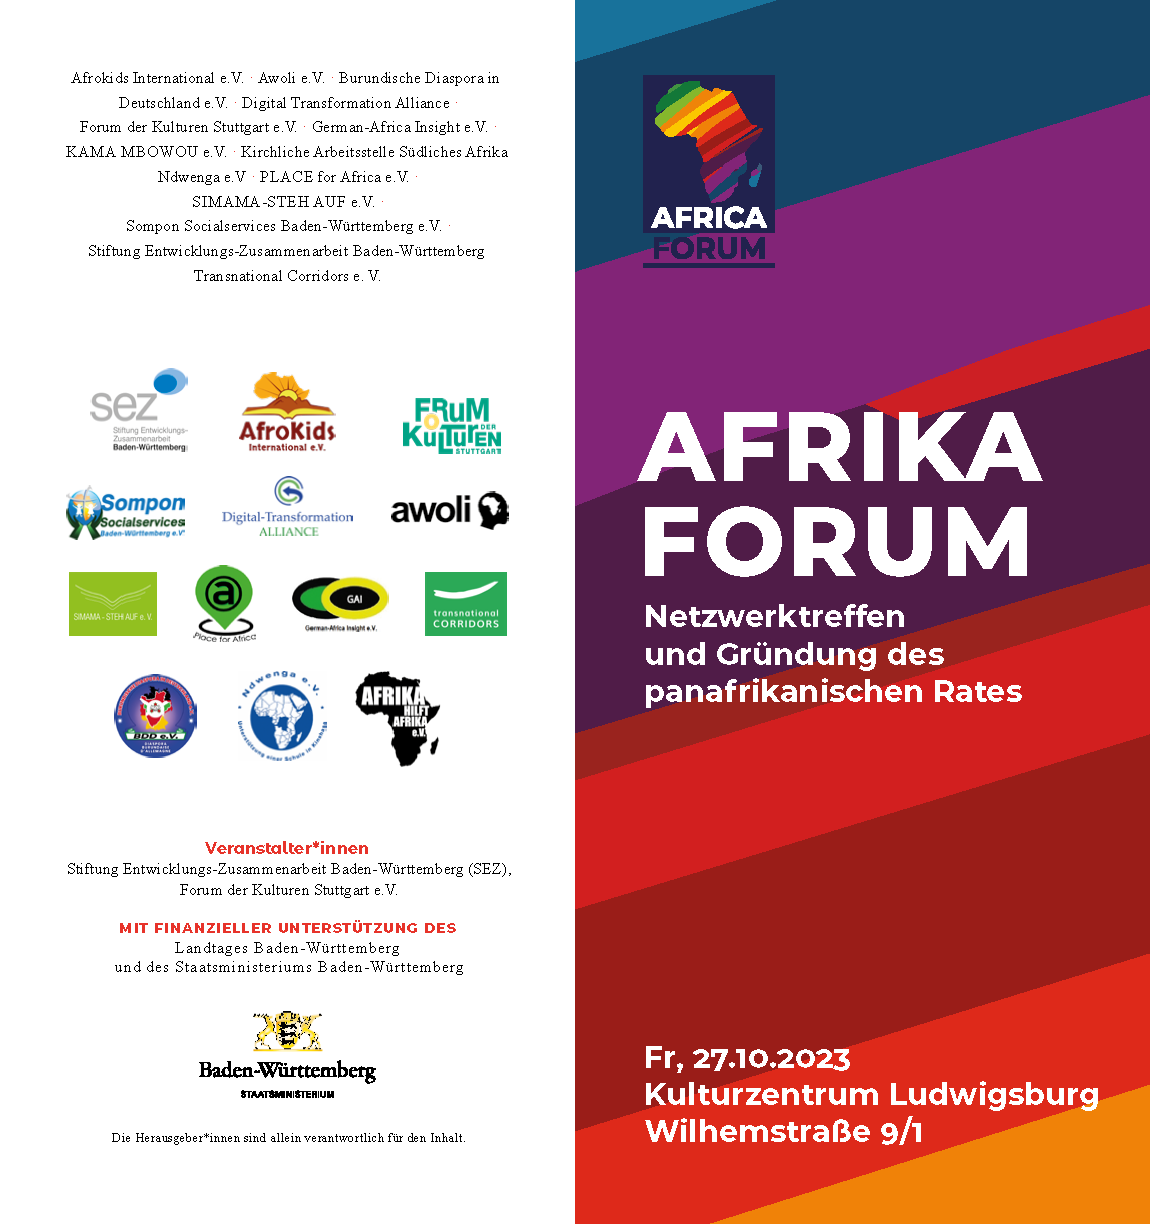 AFRIKA FORUM: Network meeting and foundation of the Pan-African Council